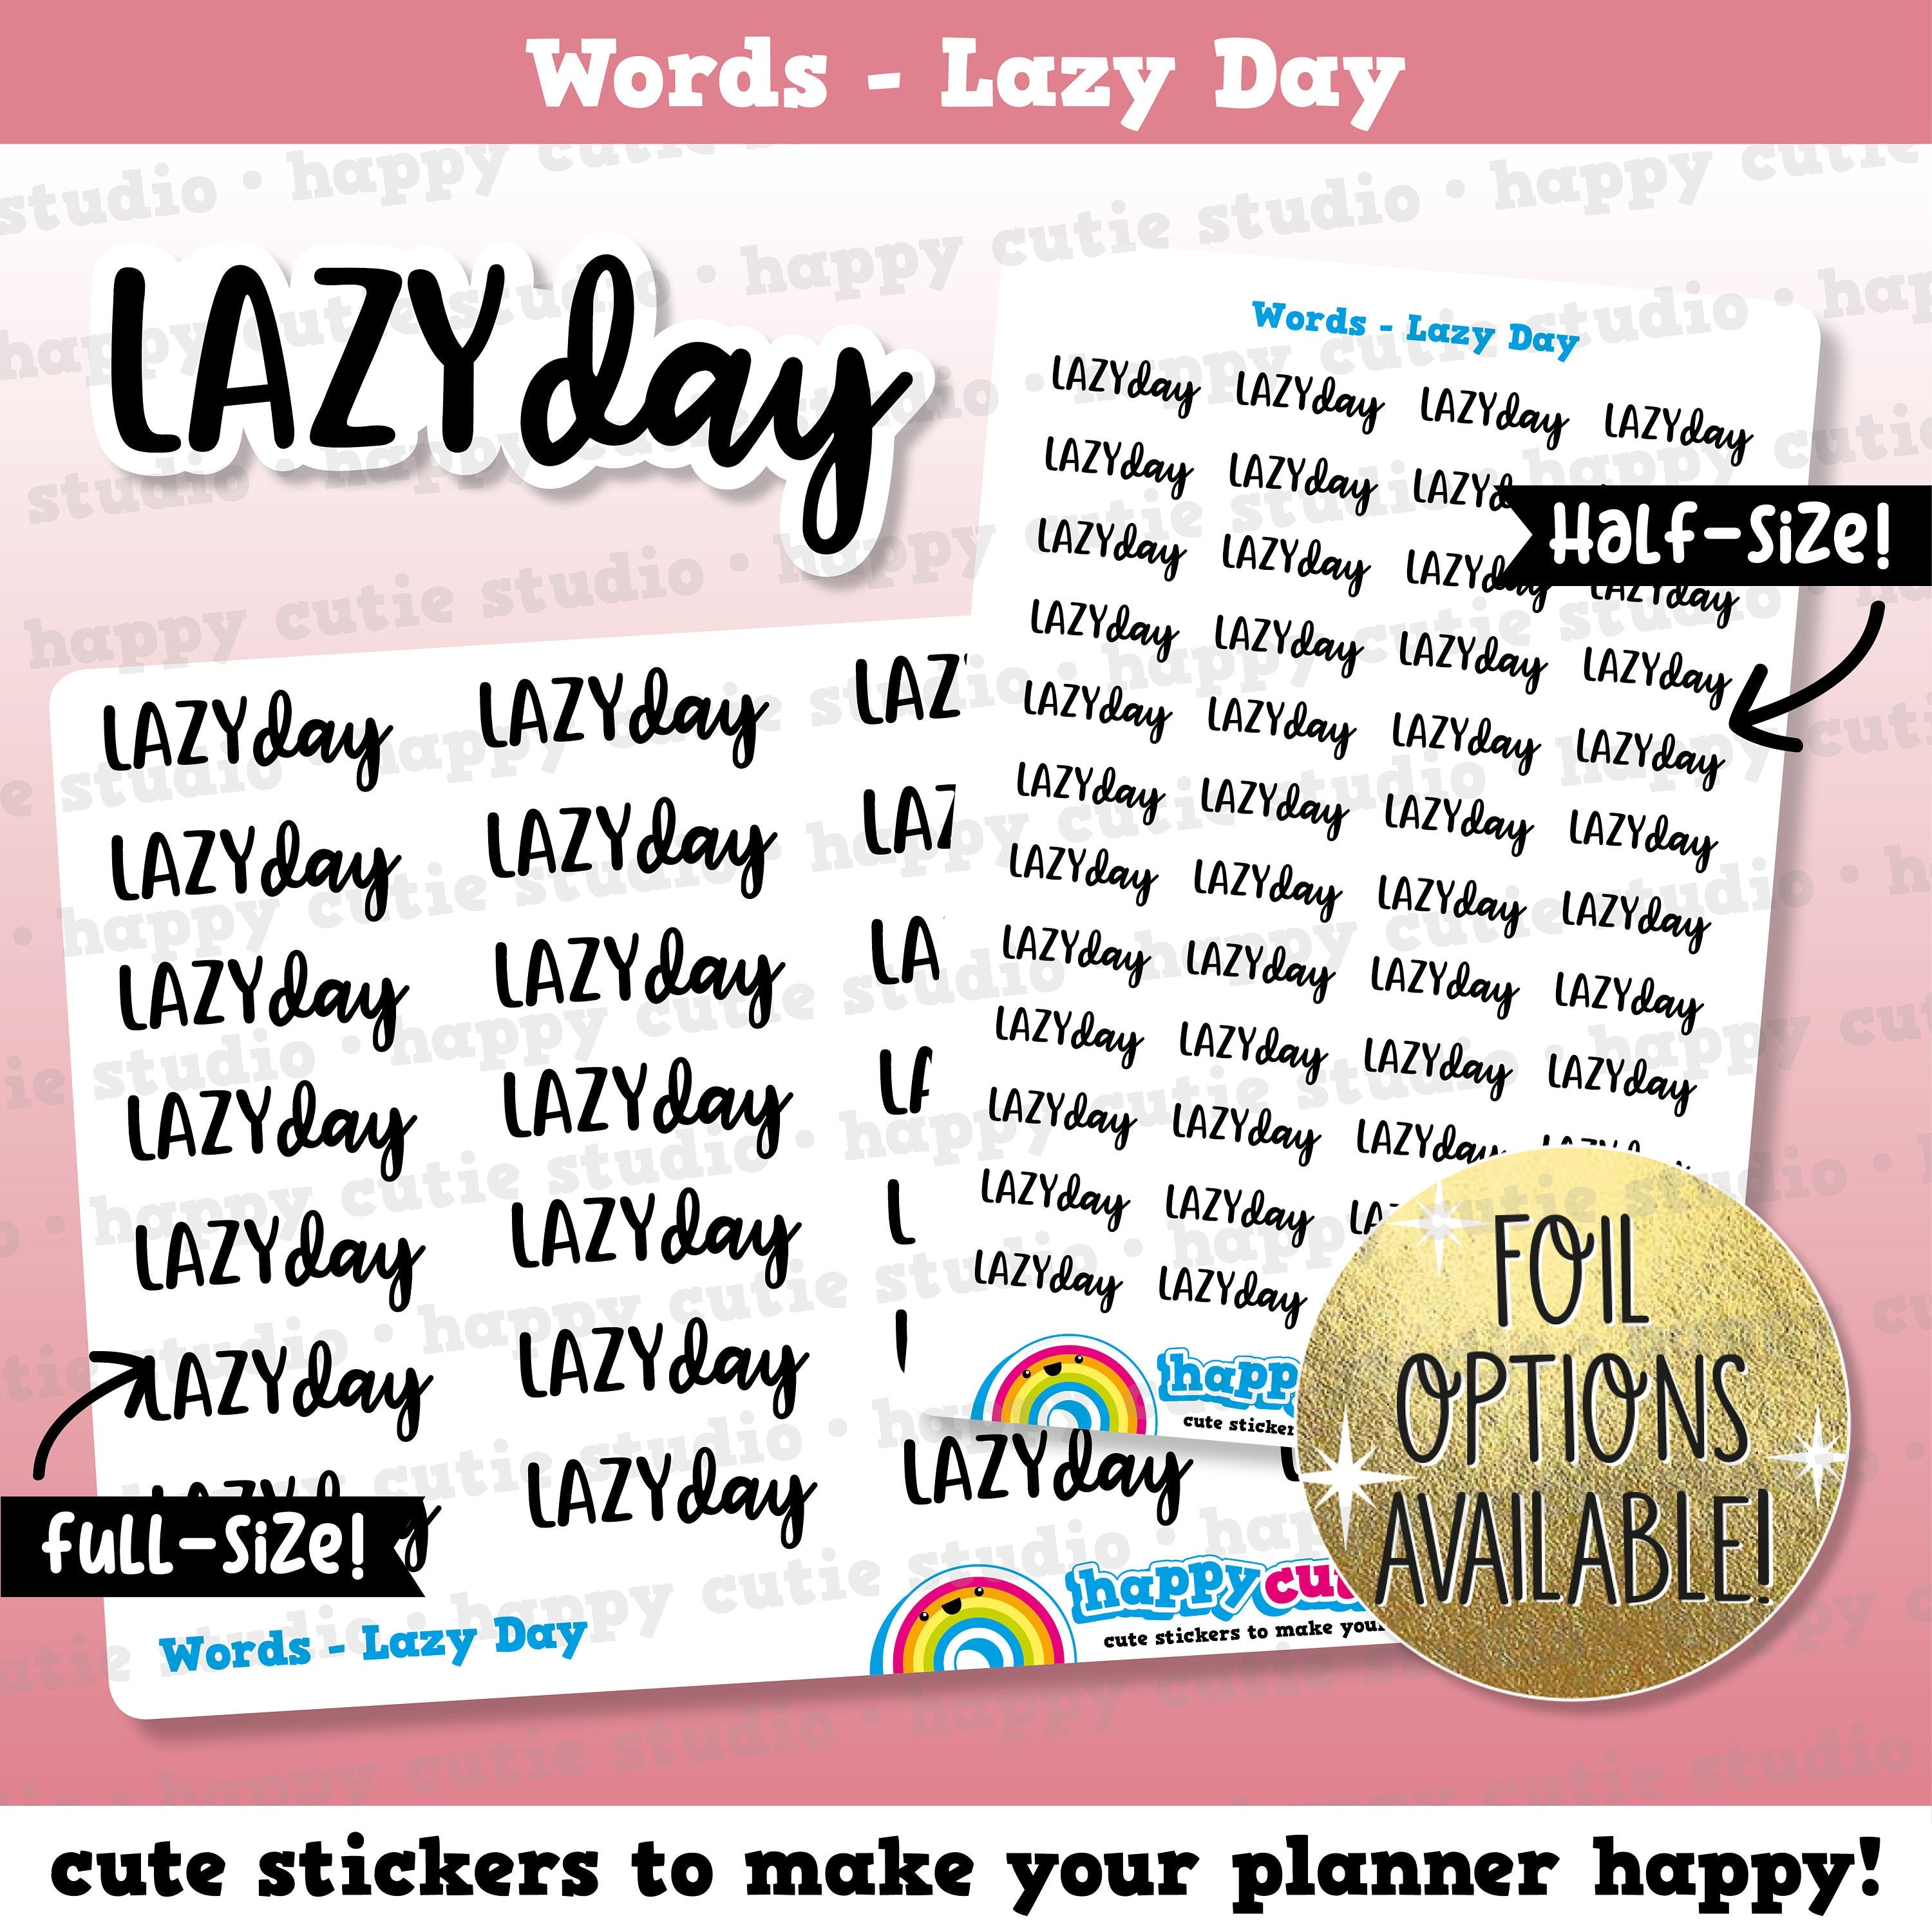 Lazy Day Words/Functional/Foil Planner Stickers